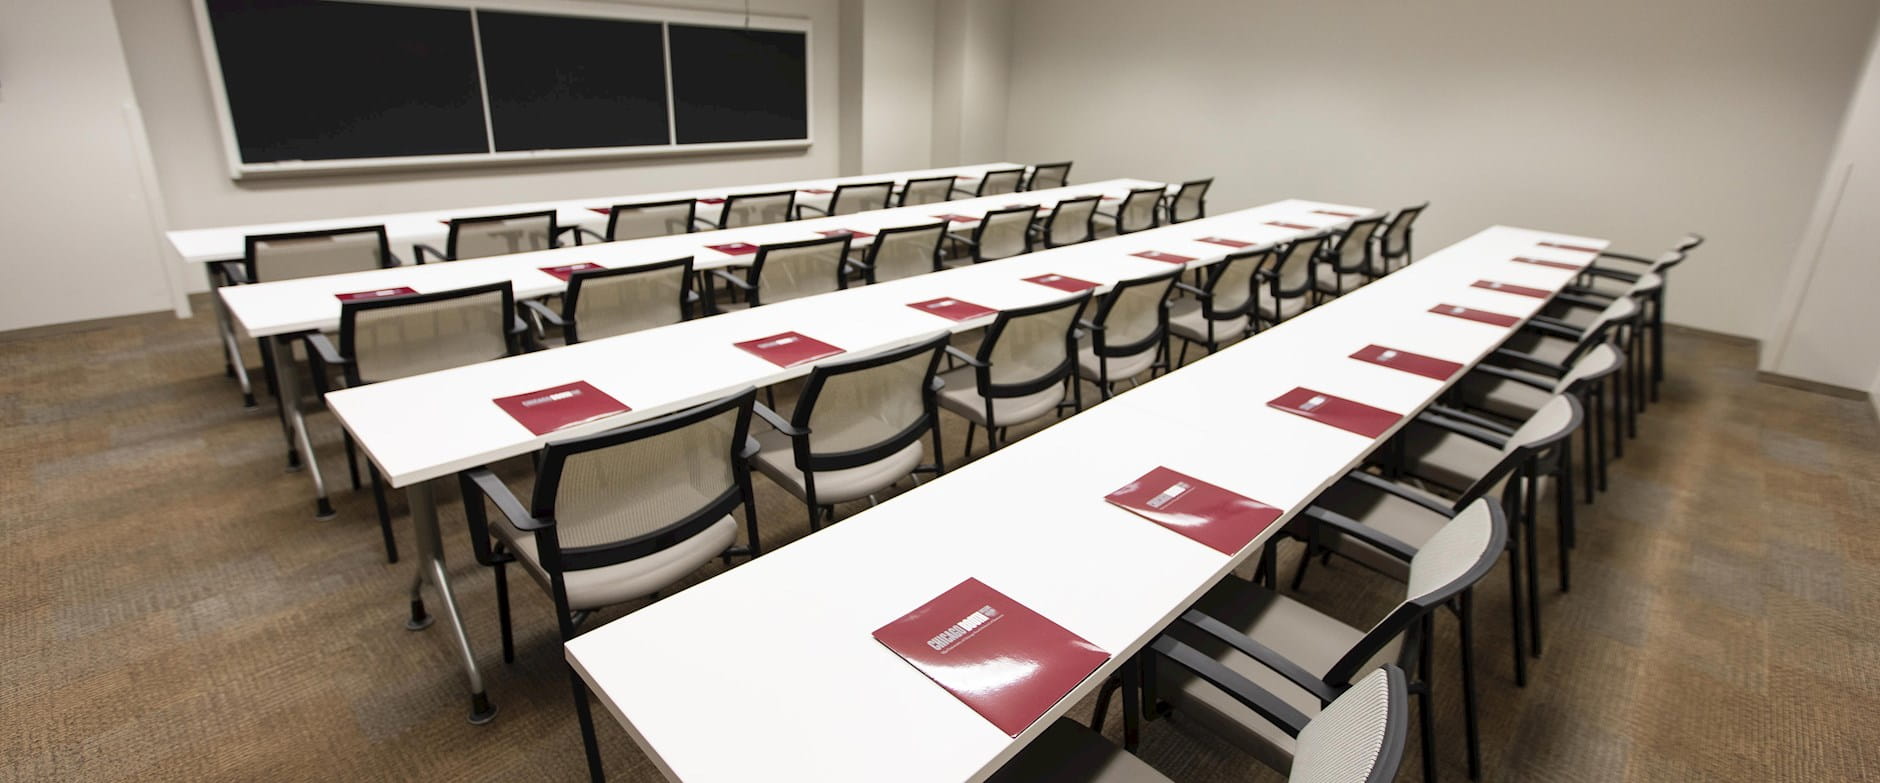 Classroom 203 at the University of Chicago Gleacher Center from the entrance with 3 rows of tables and chairs in front of a blackboard